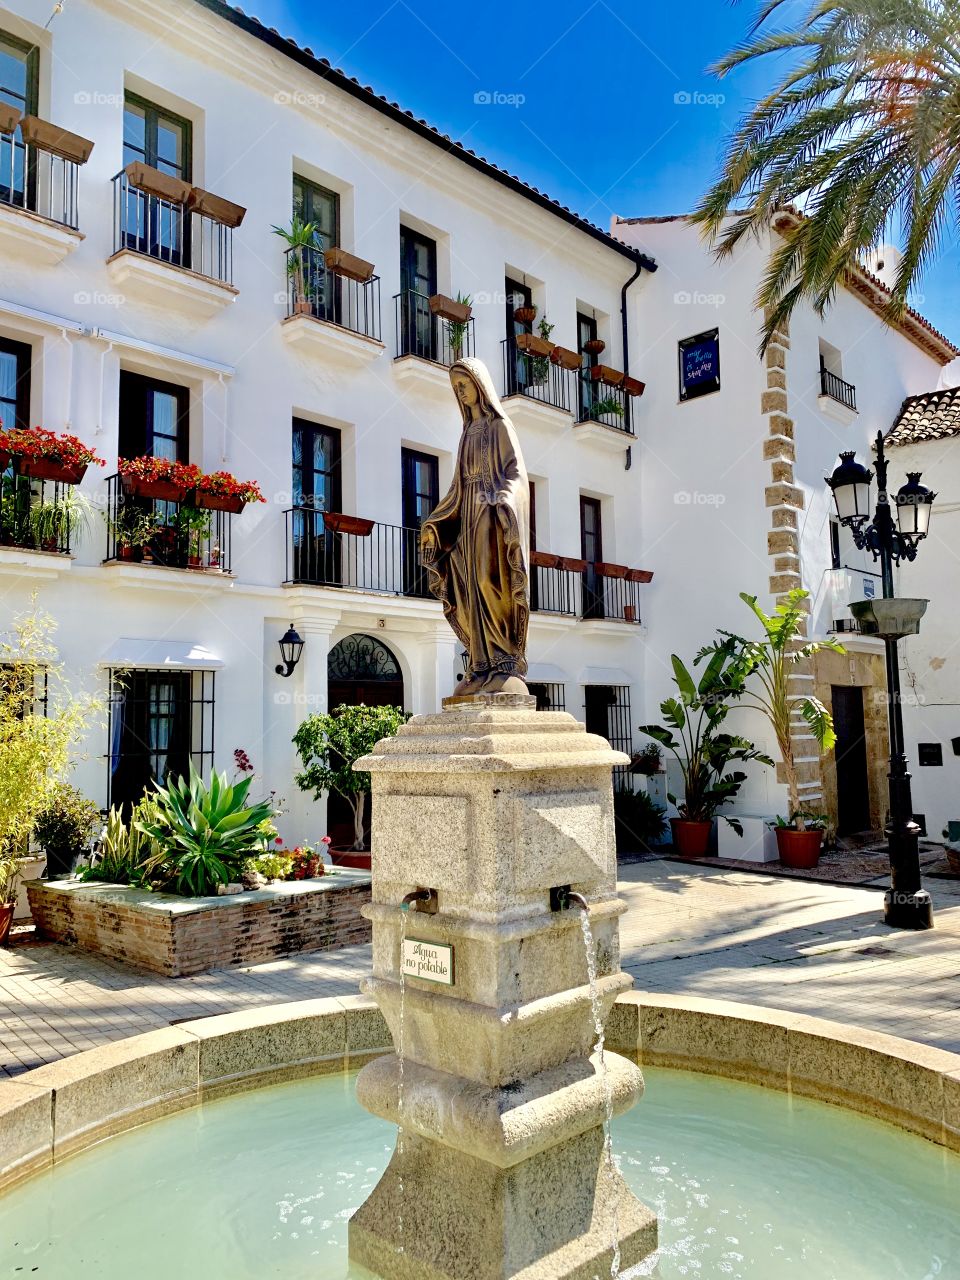 Marbella, Old Town Spain. Taken with iPhoneXR